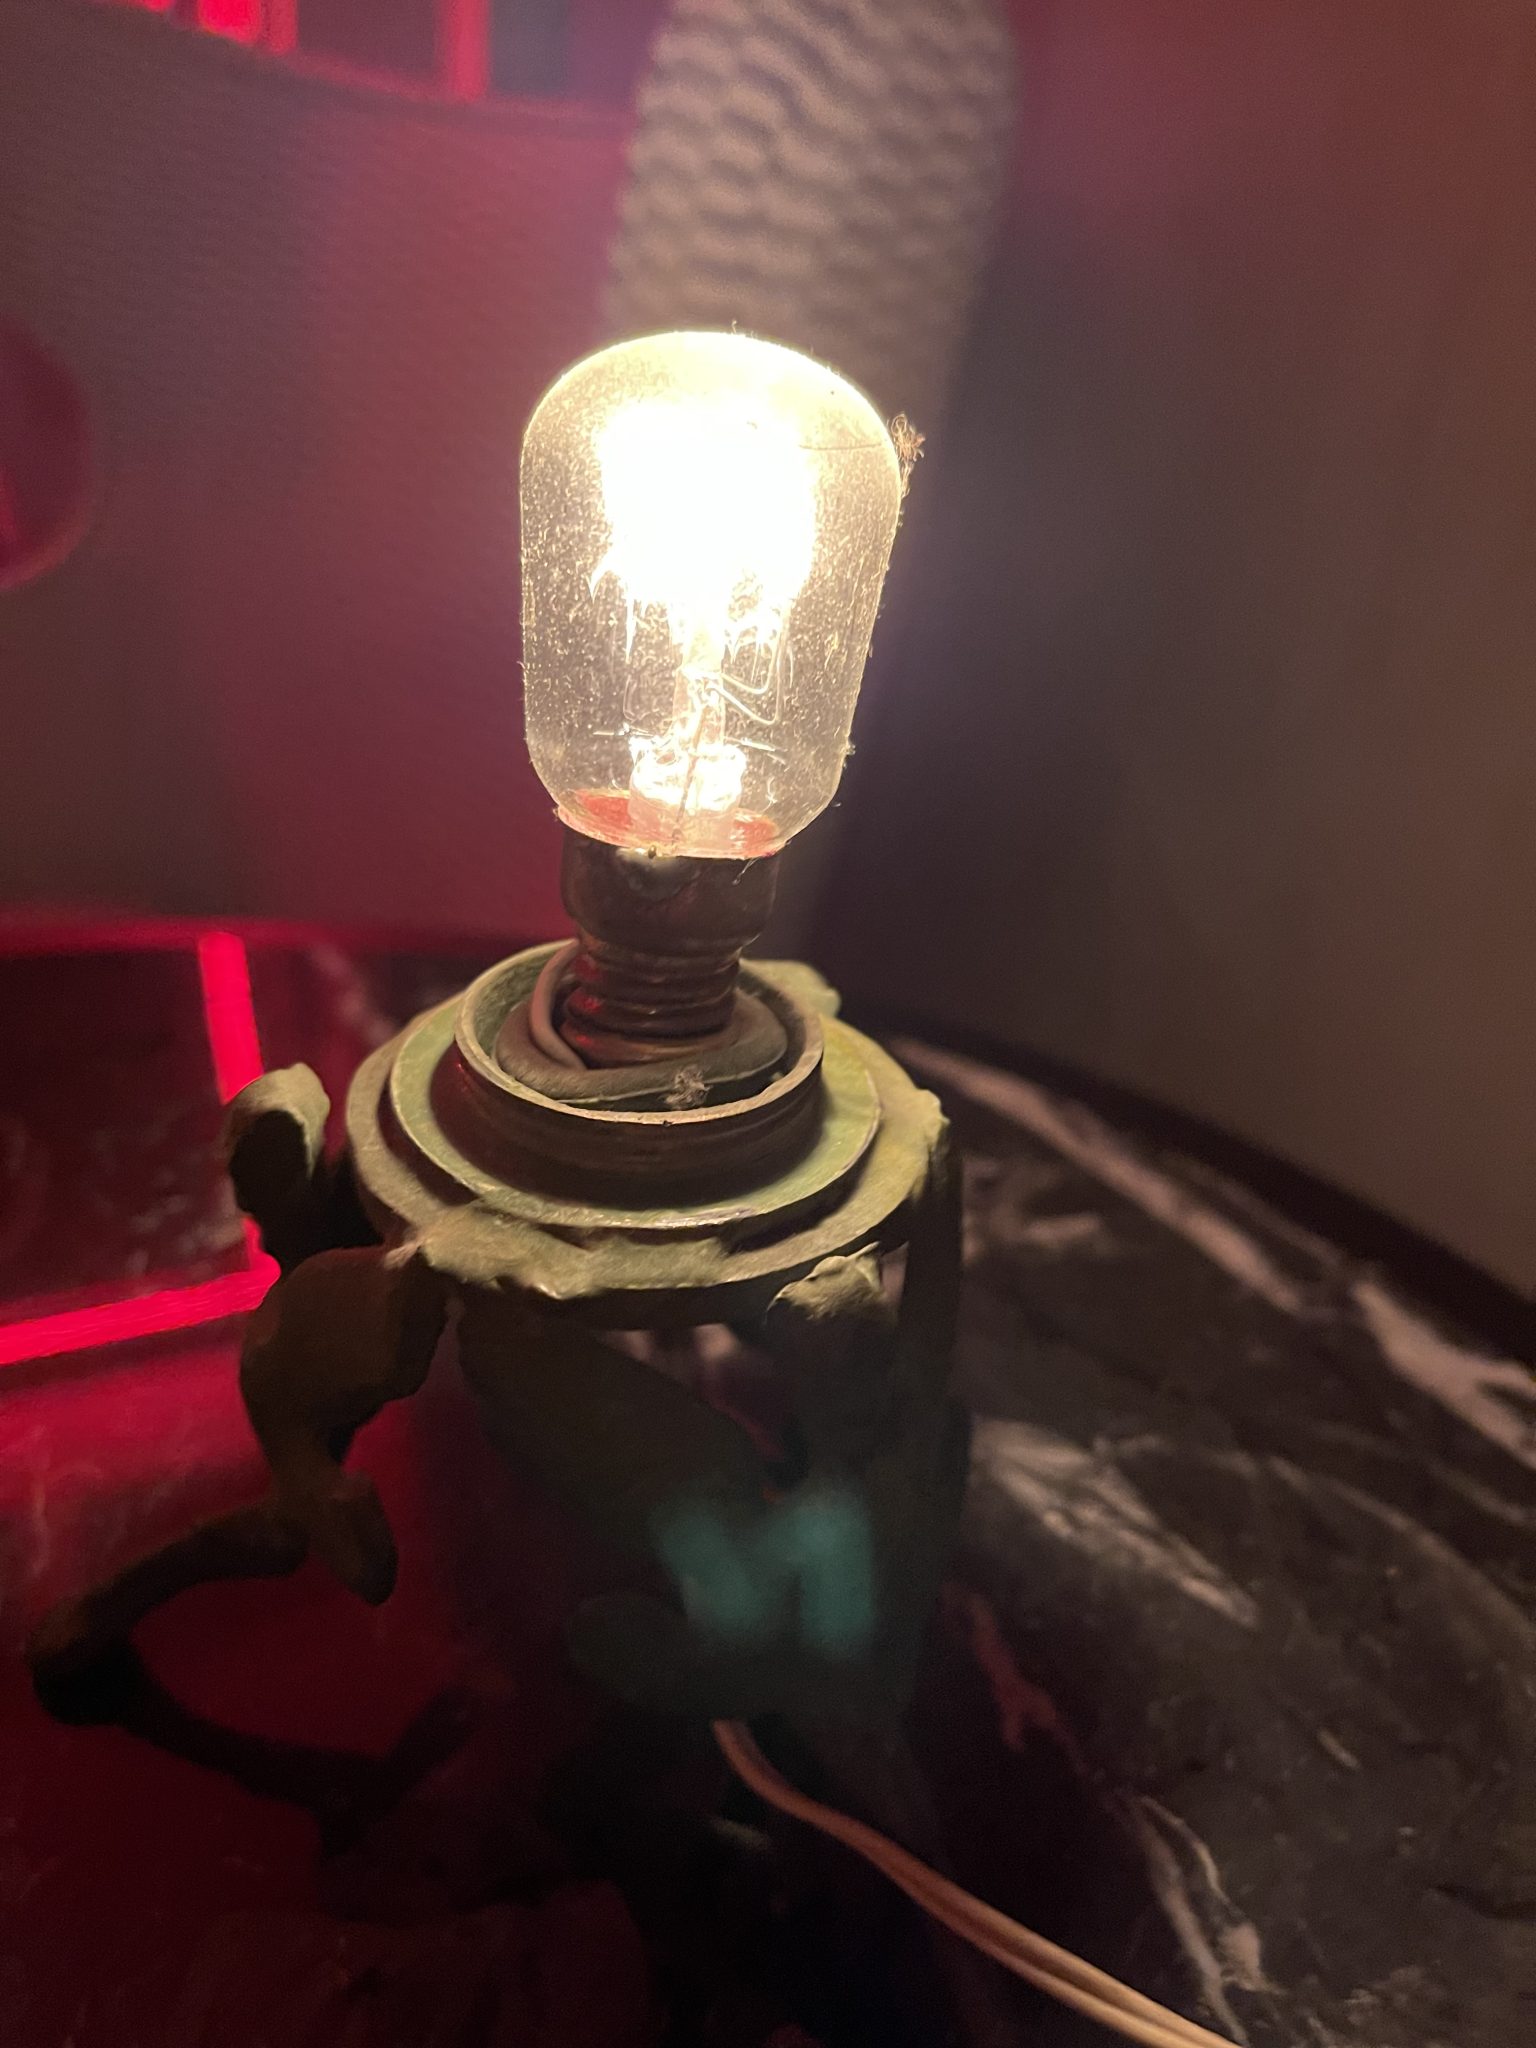 Antique lamp with impossible to find replacement bulb